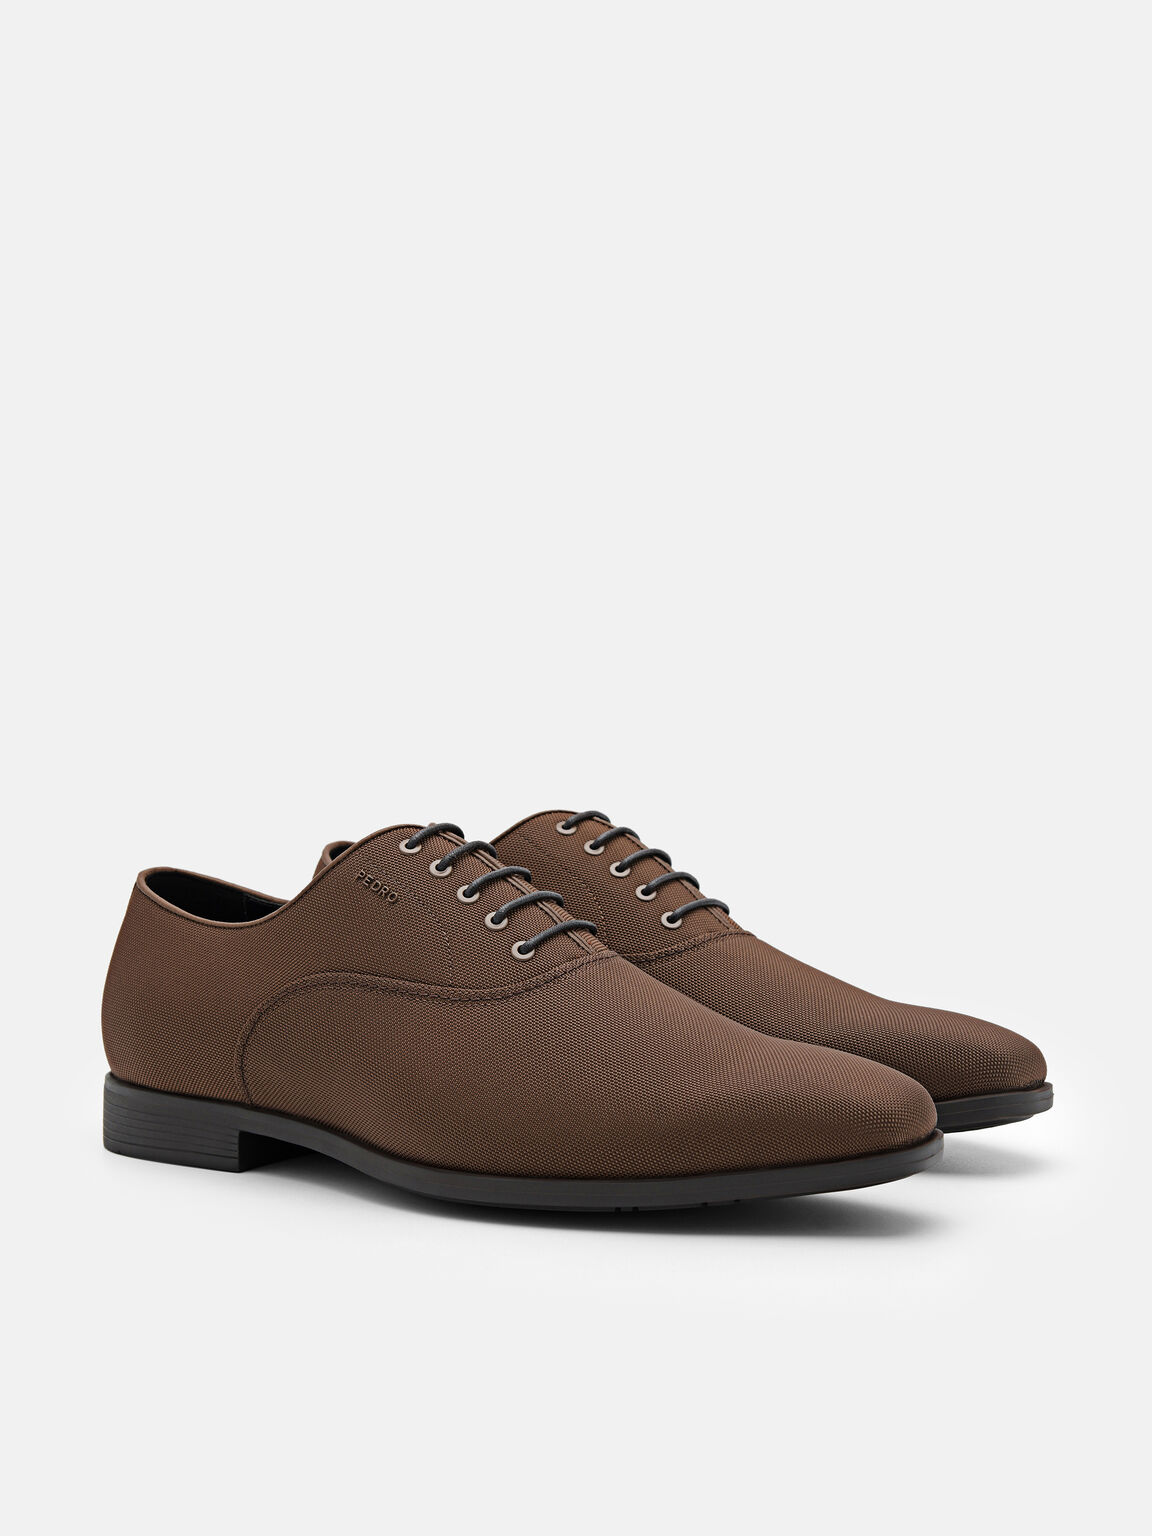 Altitude Lightweight Nylon Oxford Shoes, Brown